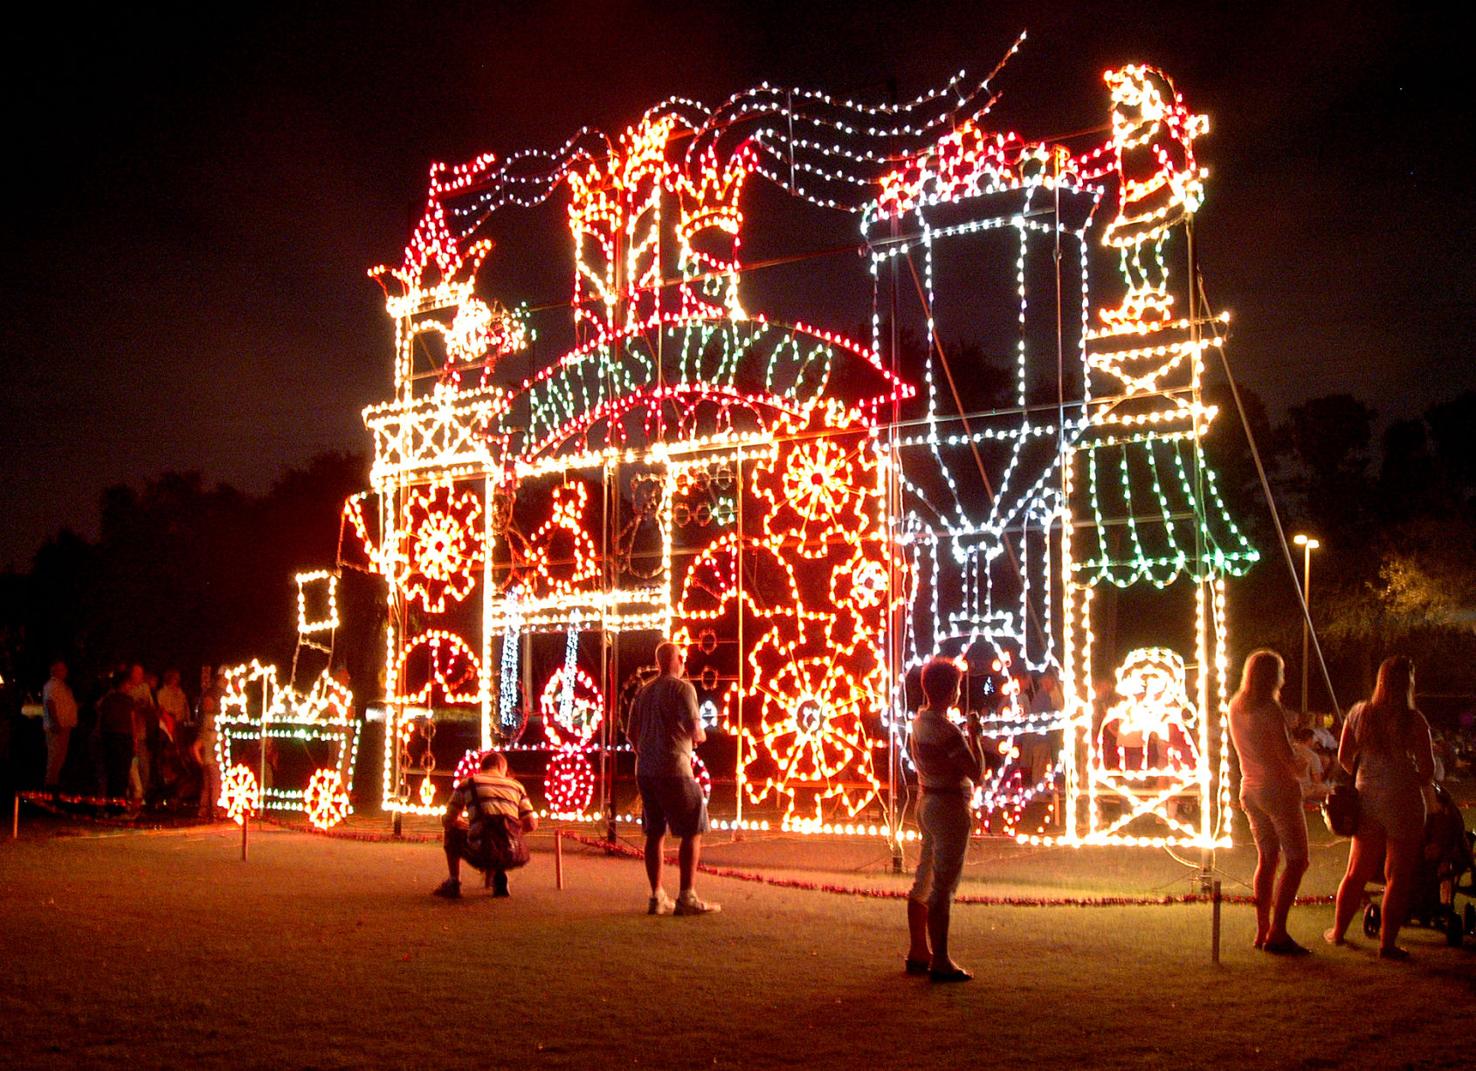 Let there be lights Largo gears up for holiday events Largo